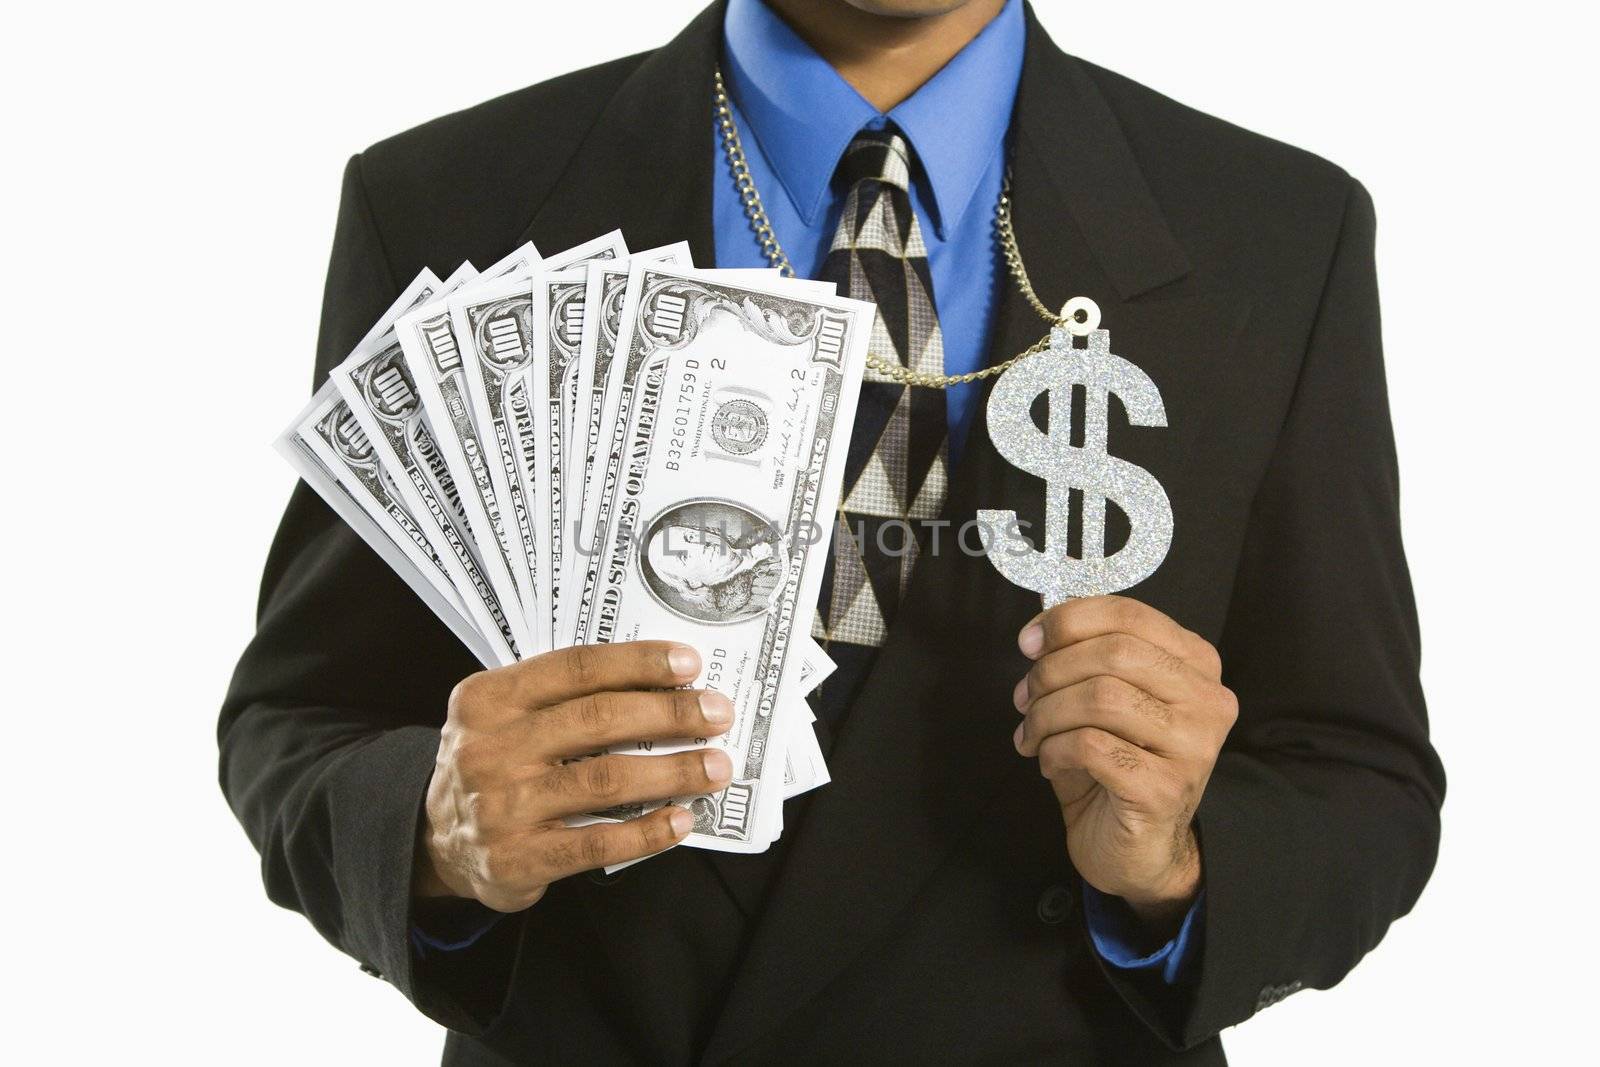 African American man in suit wearing necklace with money sign and holding cash.